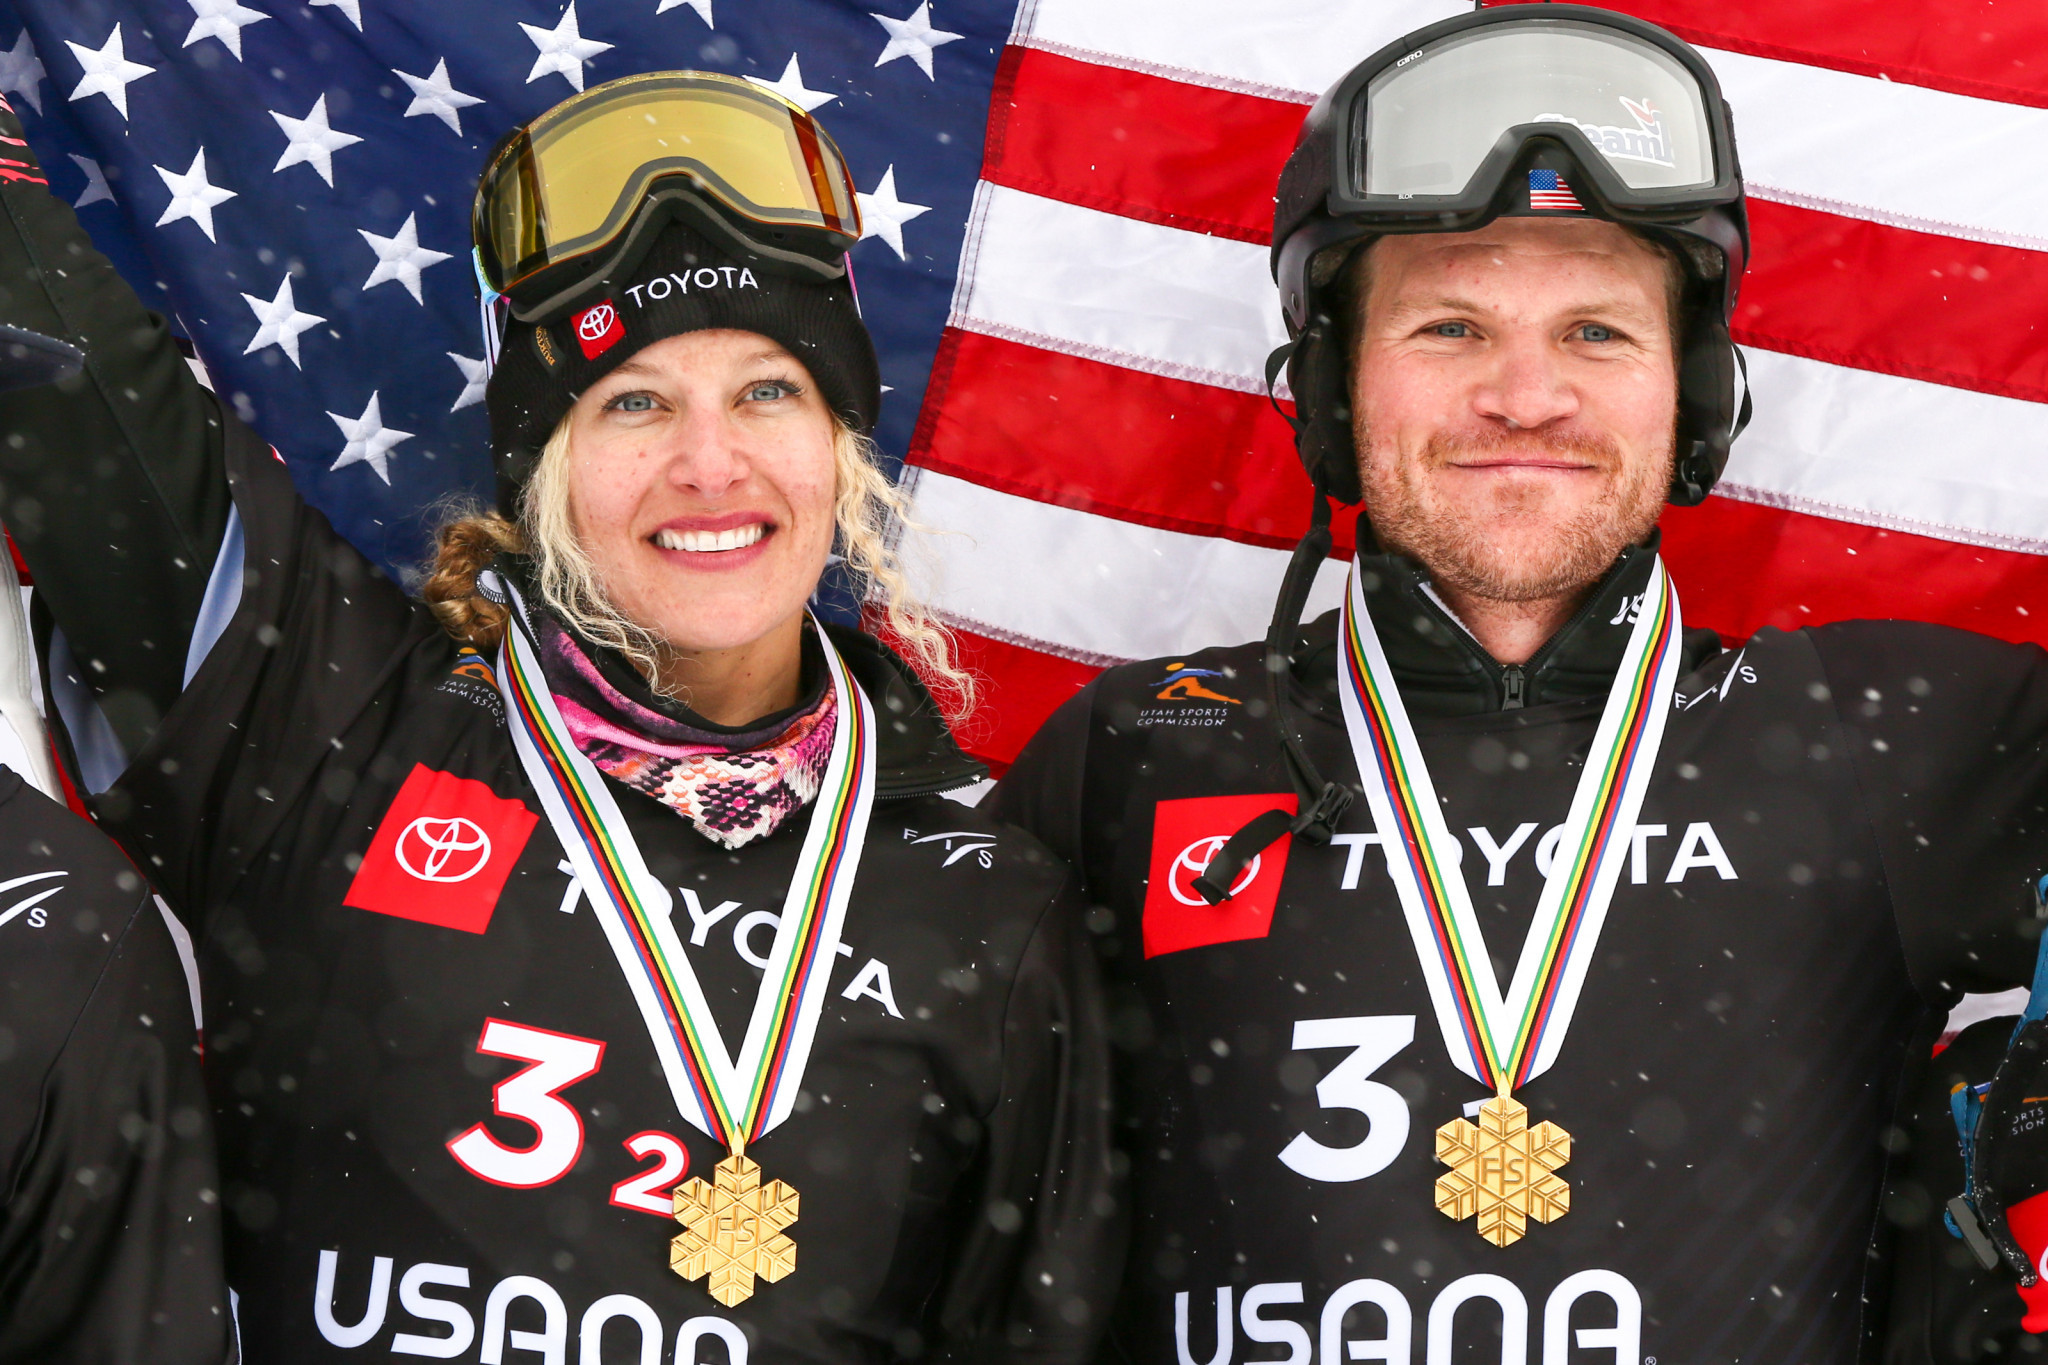 Lindsey Jacobellis and Mick Dierdorff came together to win the first world mixed team snowboard cross title in Utah ©Getty Images